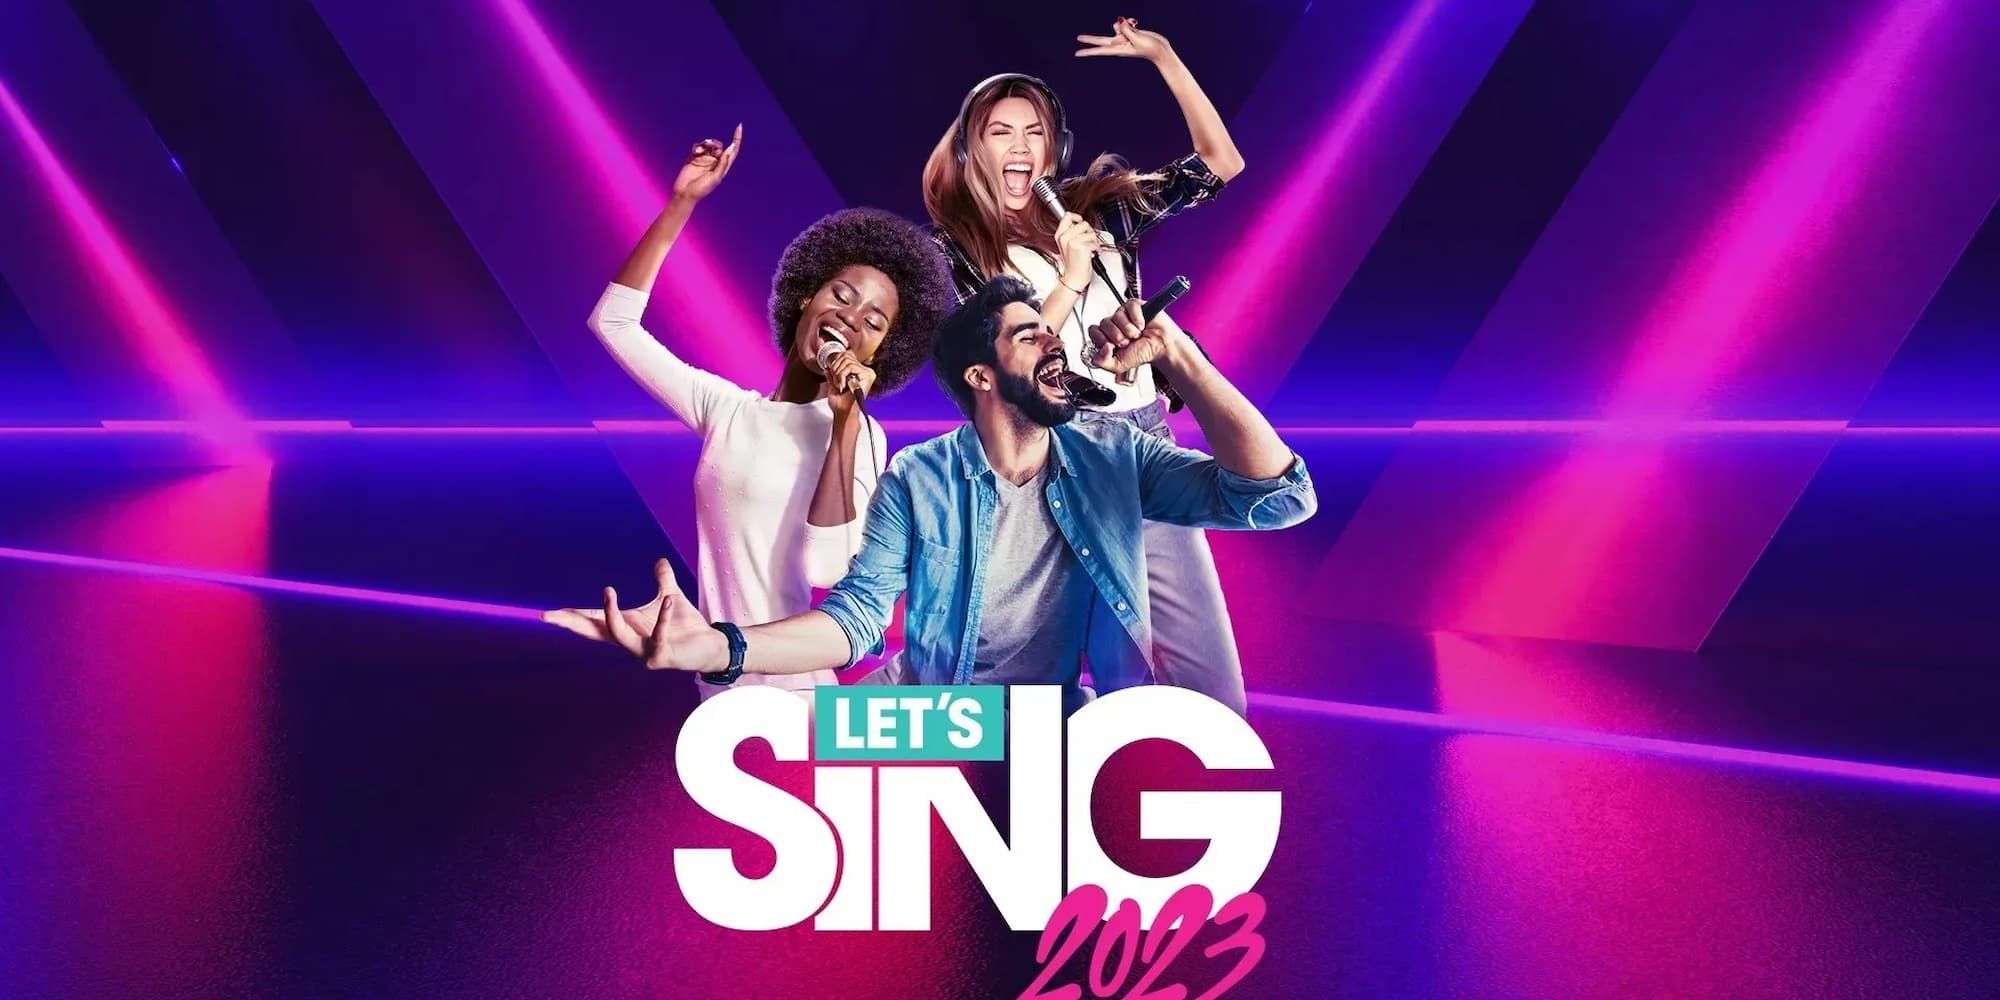 The Let's Sing 2023 logo sits under two women and a man singing their hearts out into microphones.